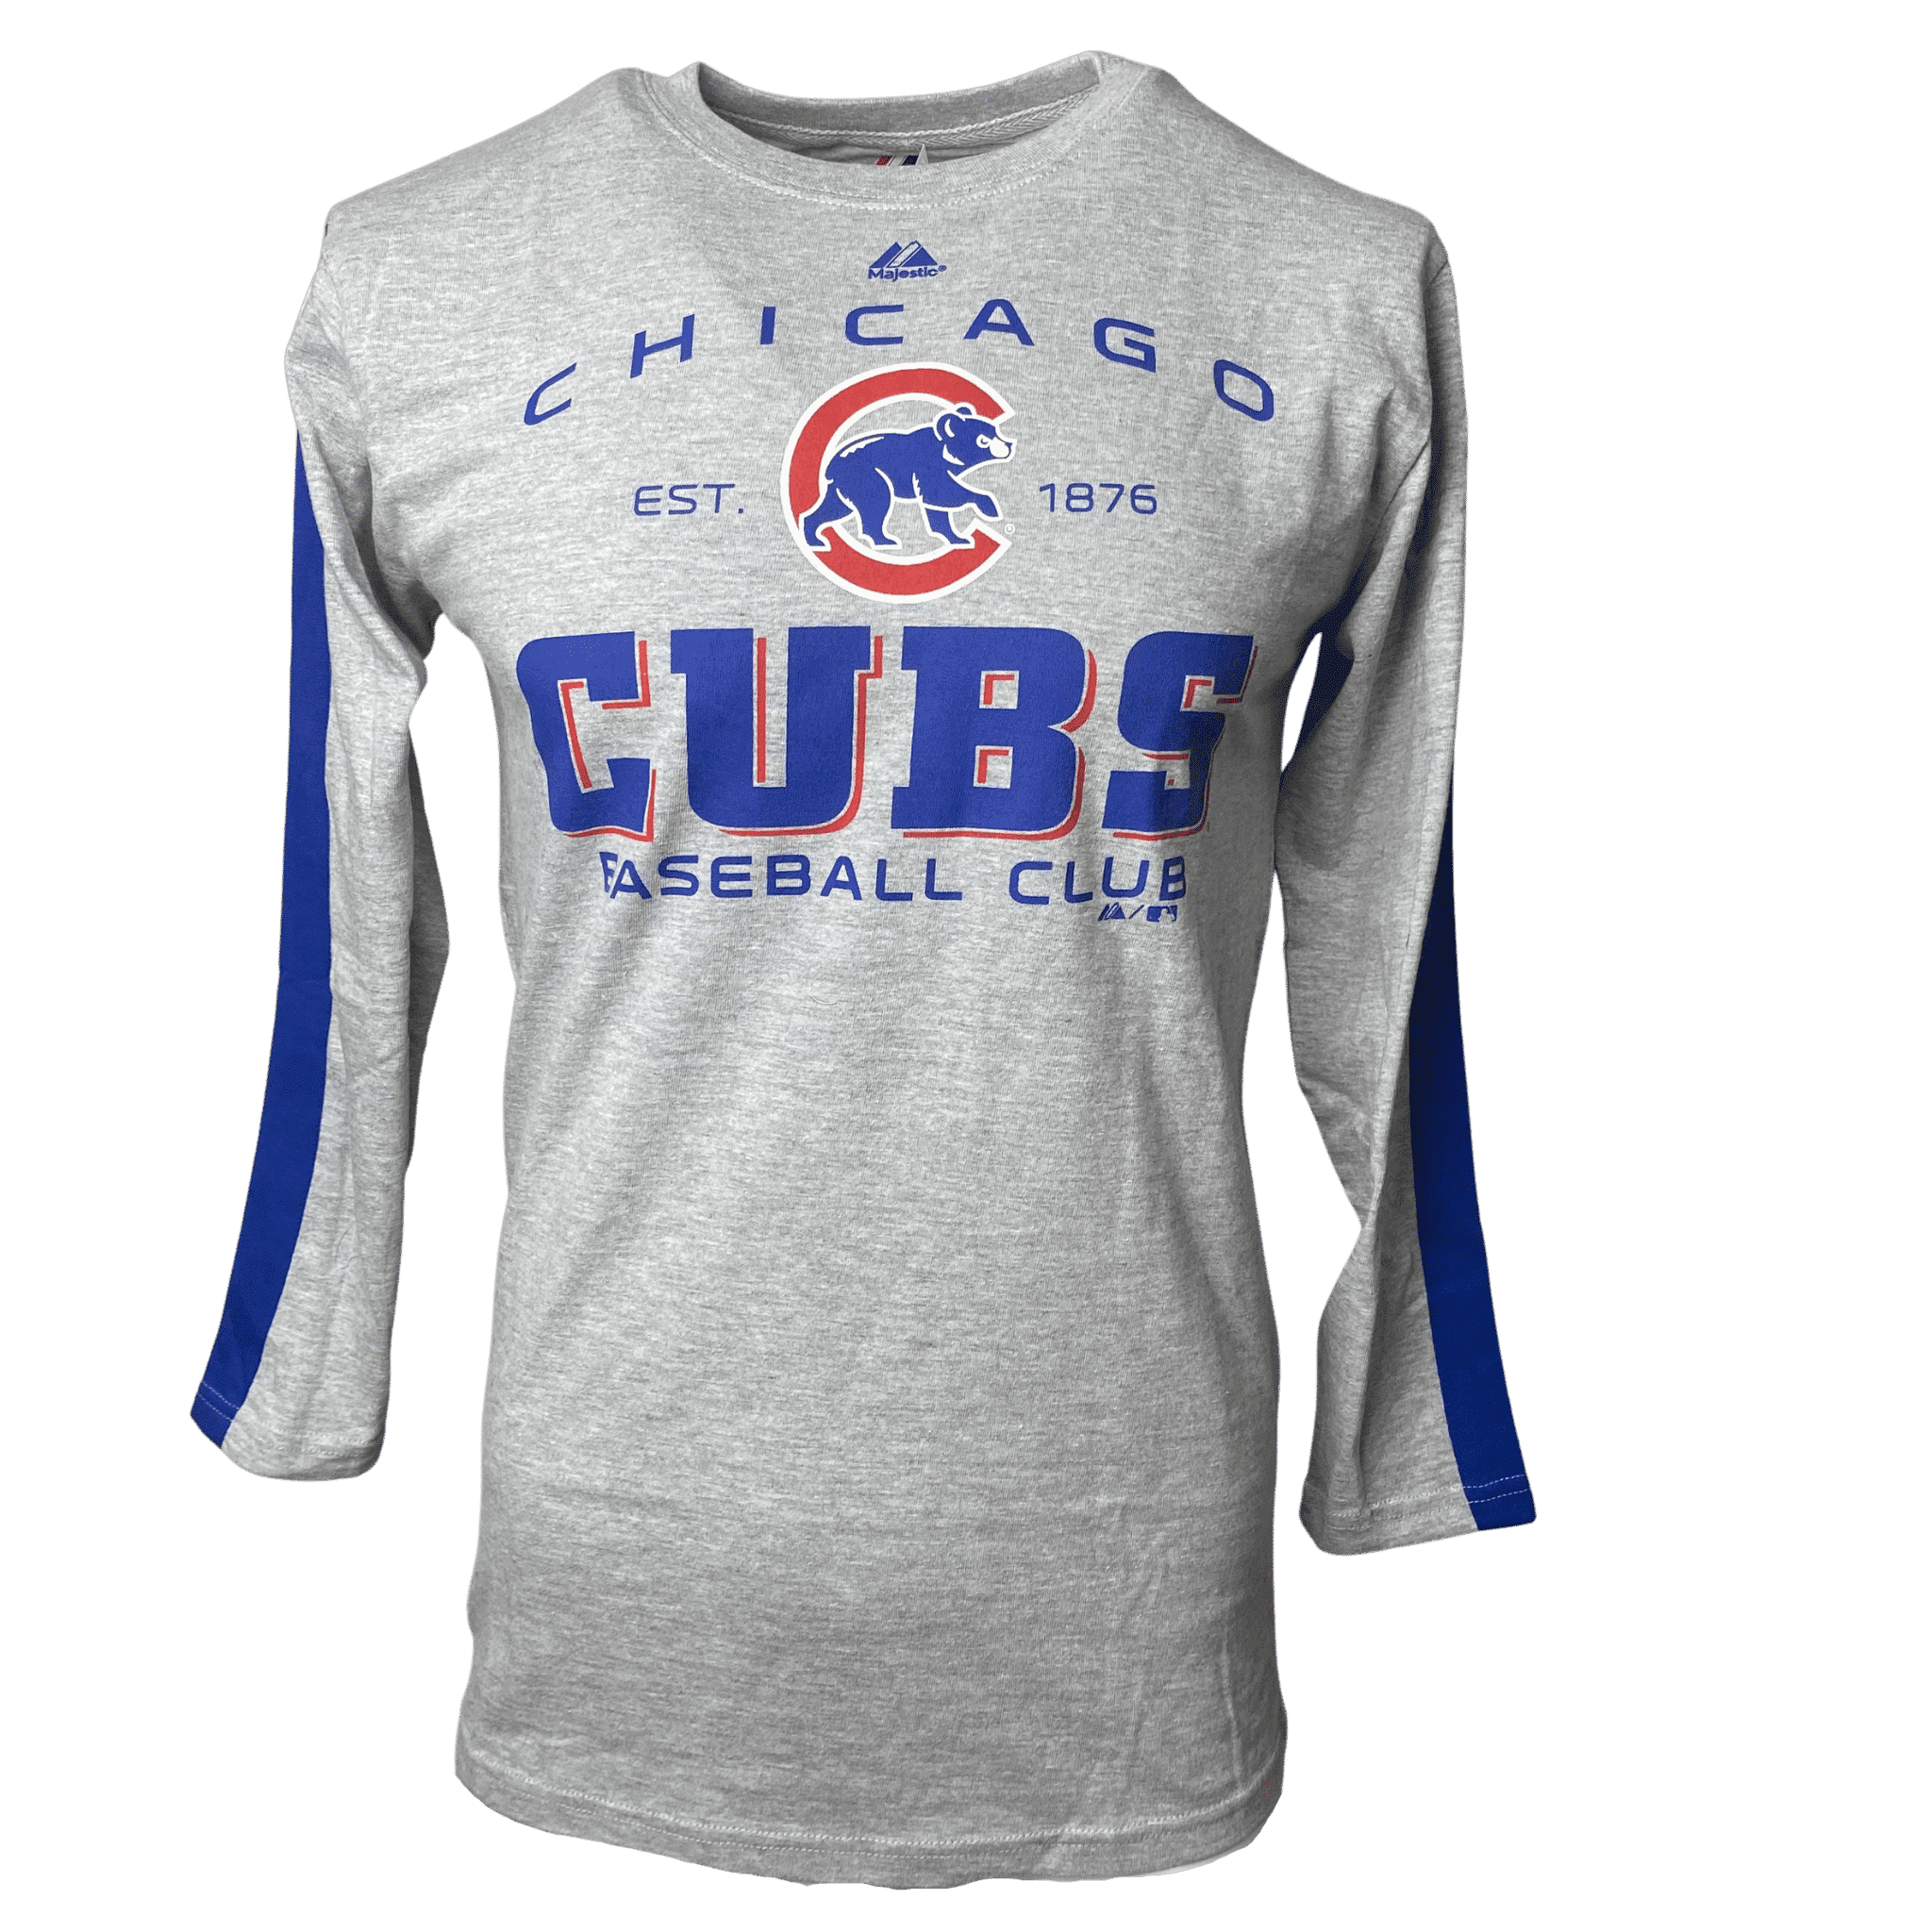 youth cubs t shirt